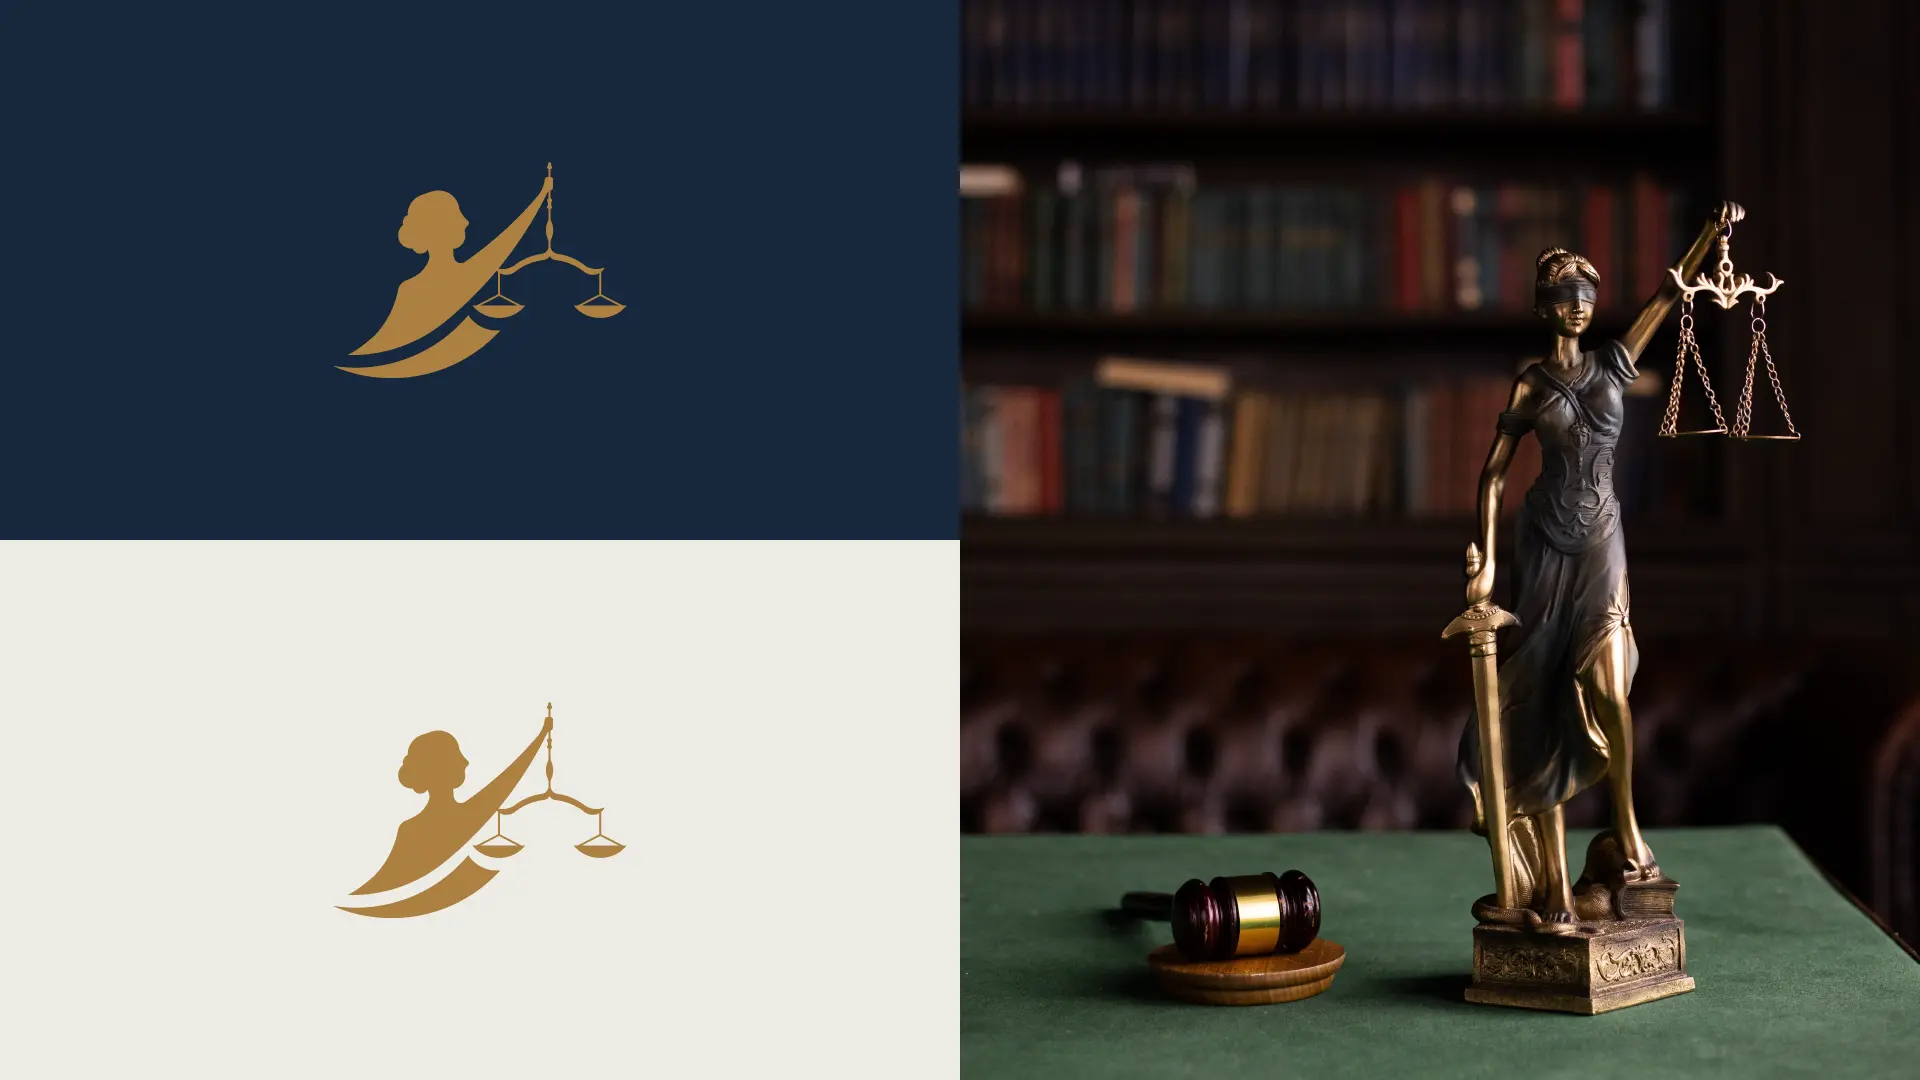 Image displaying Jefferson Vilela´s symbol on both a light and dark backgrounds, and on the right side, a picture of Lady Justice